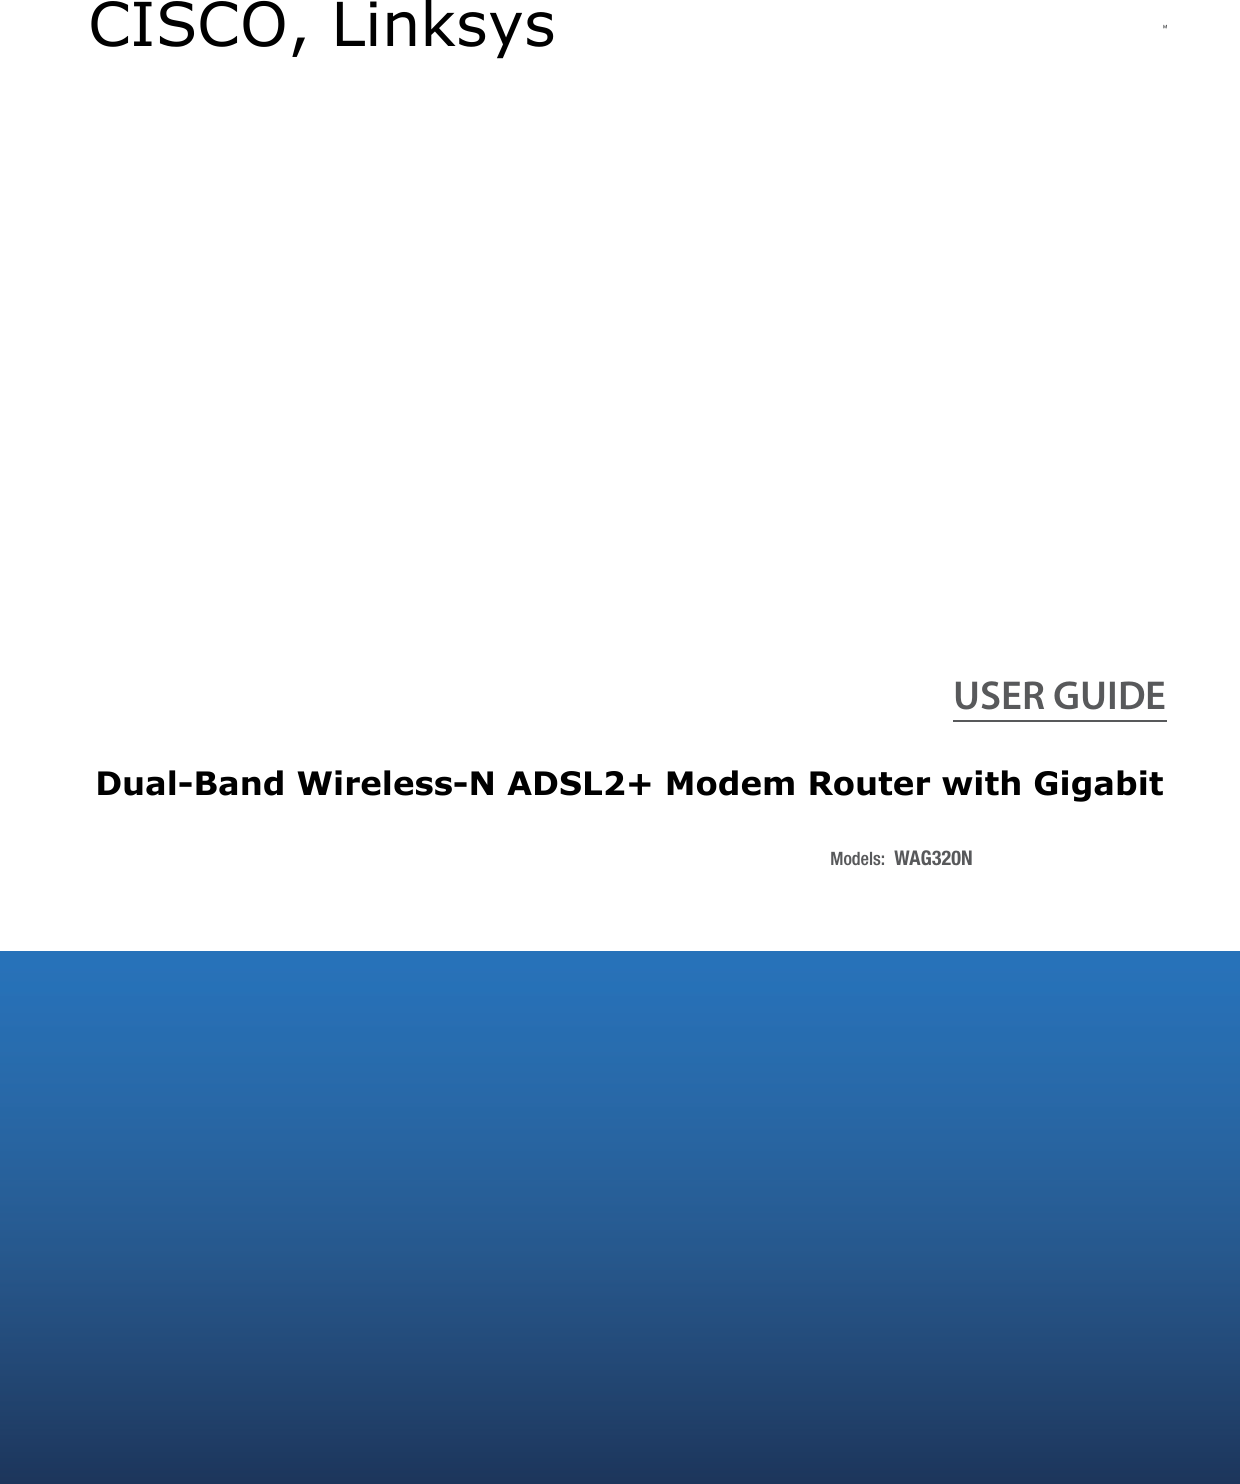 USER GUIDEModels: WAG320NDual-Band Wireless-N ADSL2+ Modem Router with Gigabit CISCO, Linksys